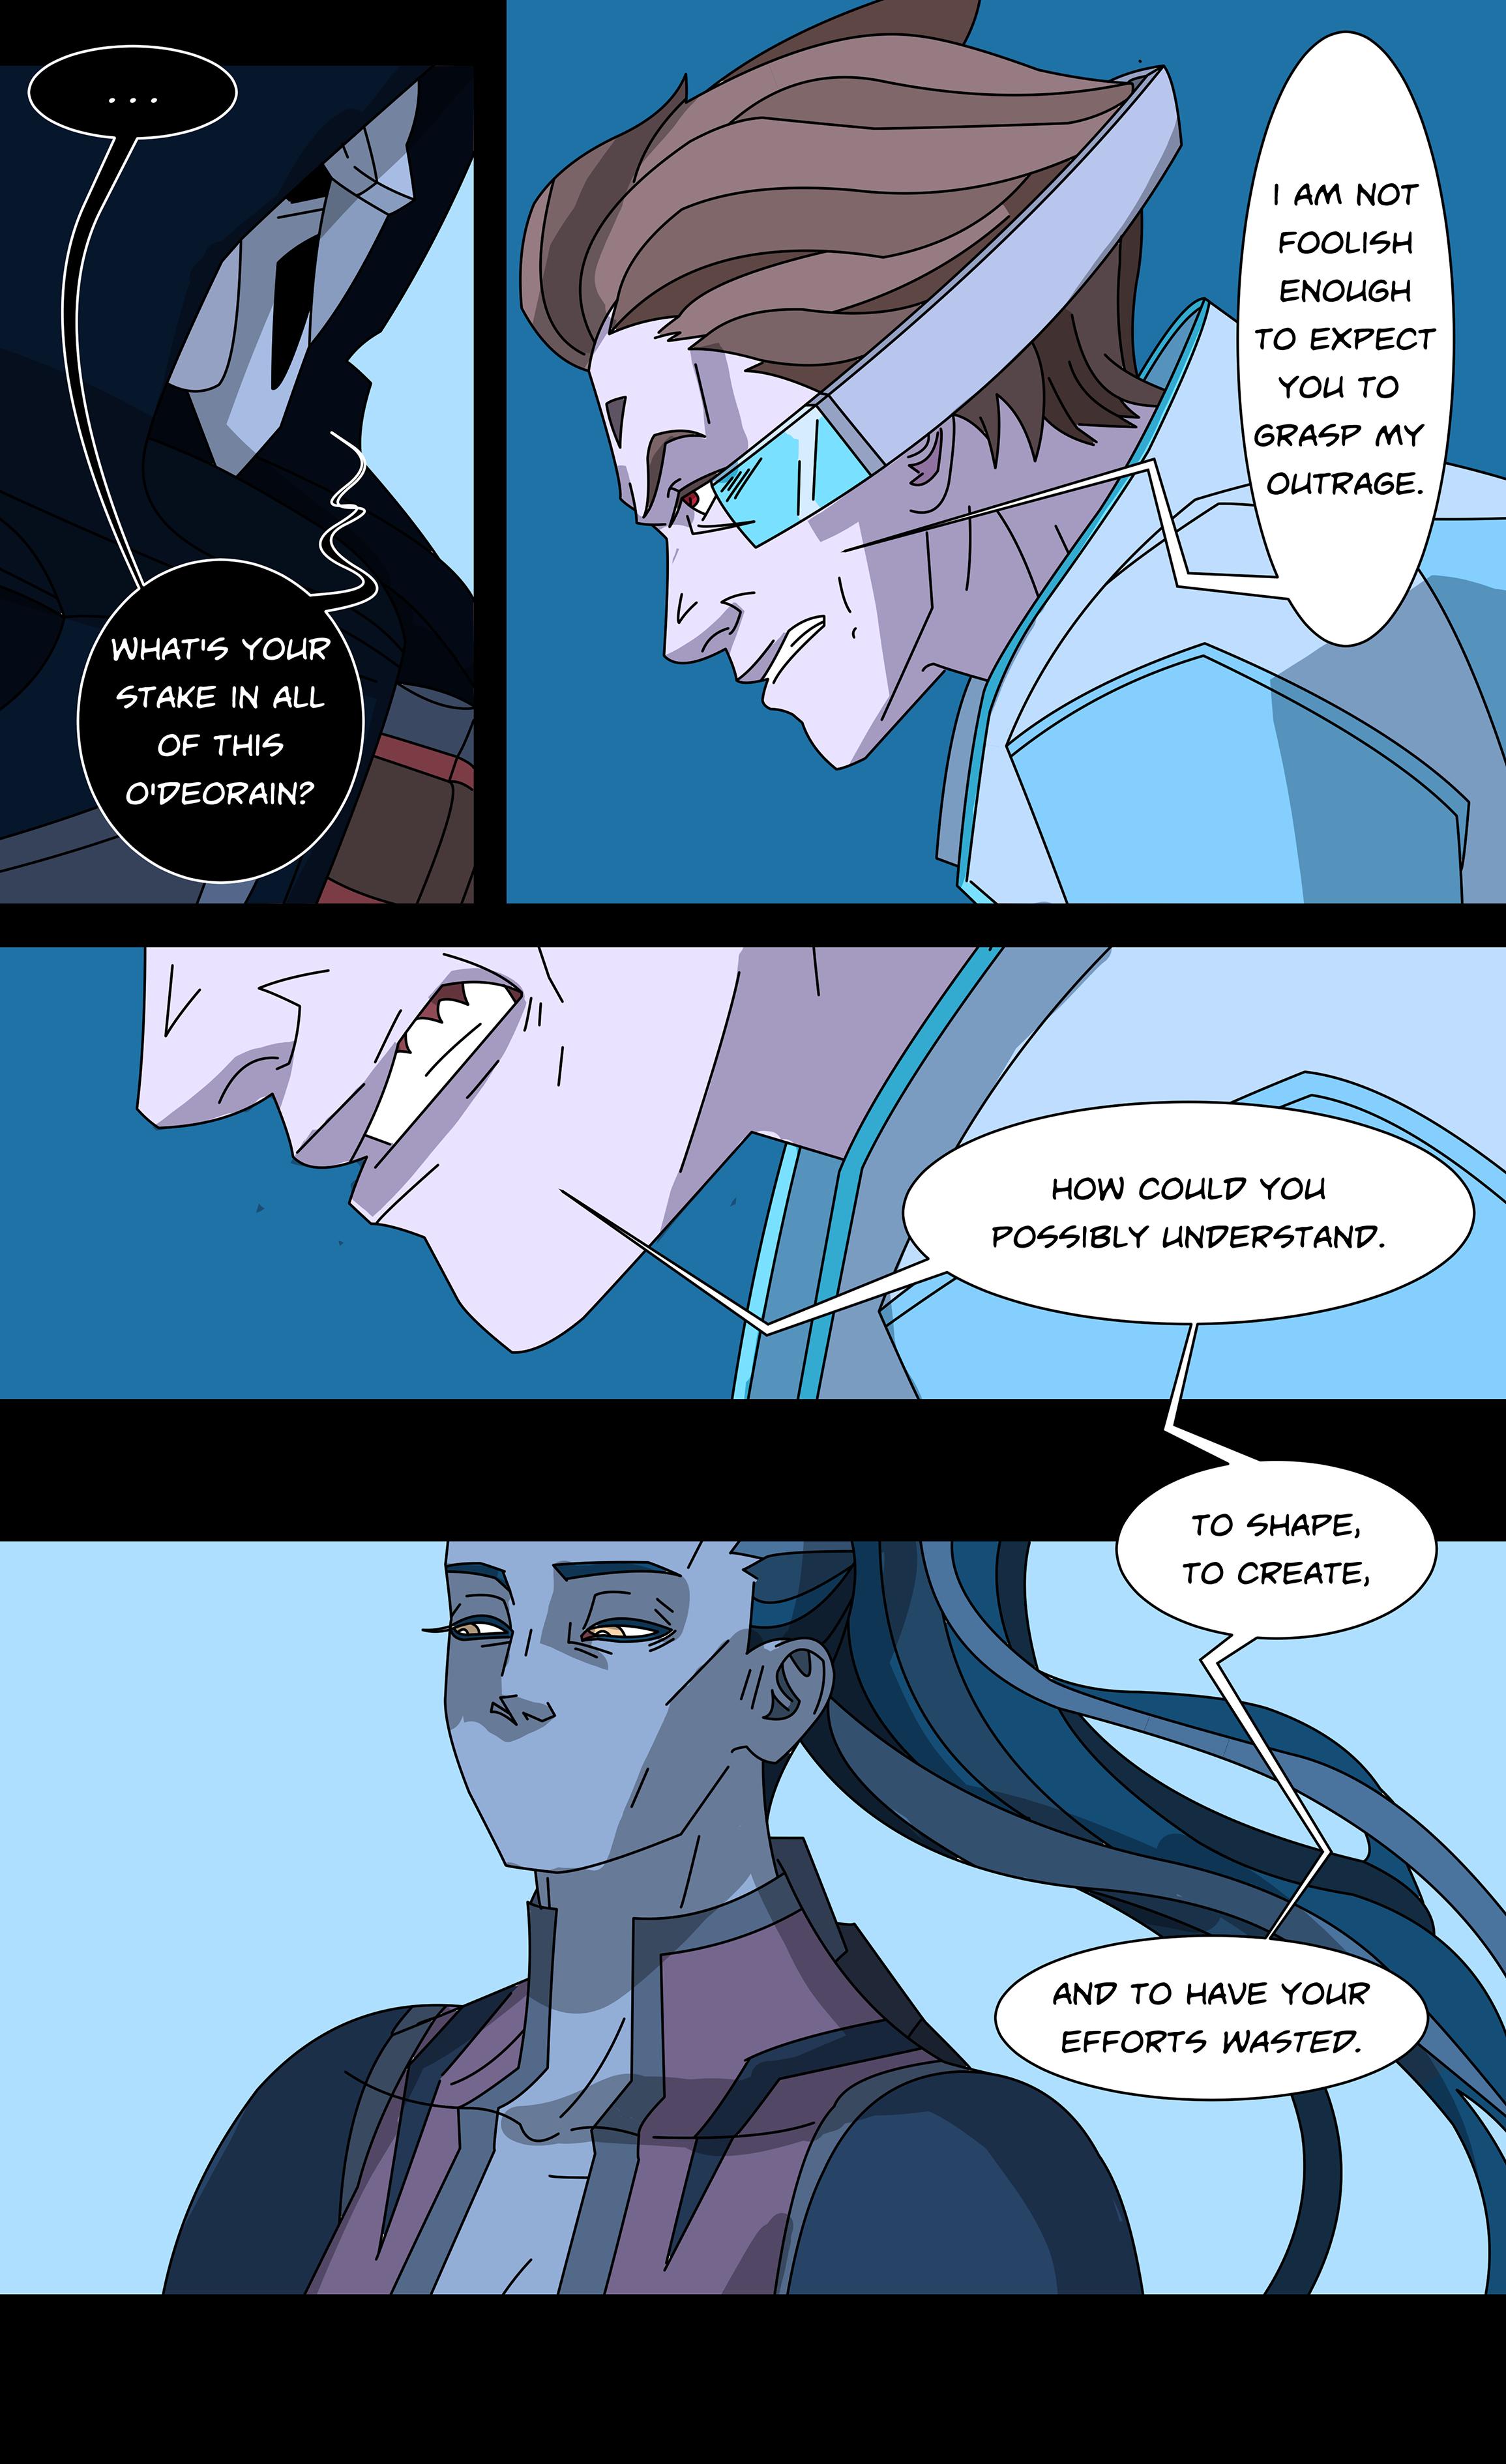 Tesslyn || THE SUN🤖🌿 on Twitter: "My Talon fancomic GHOST #3 is out, pages. If you're a of Widowmaker, Talon, Overwatch, or me, consider checking it out 🕷️💀